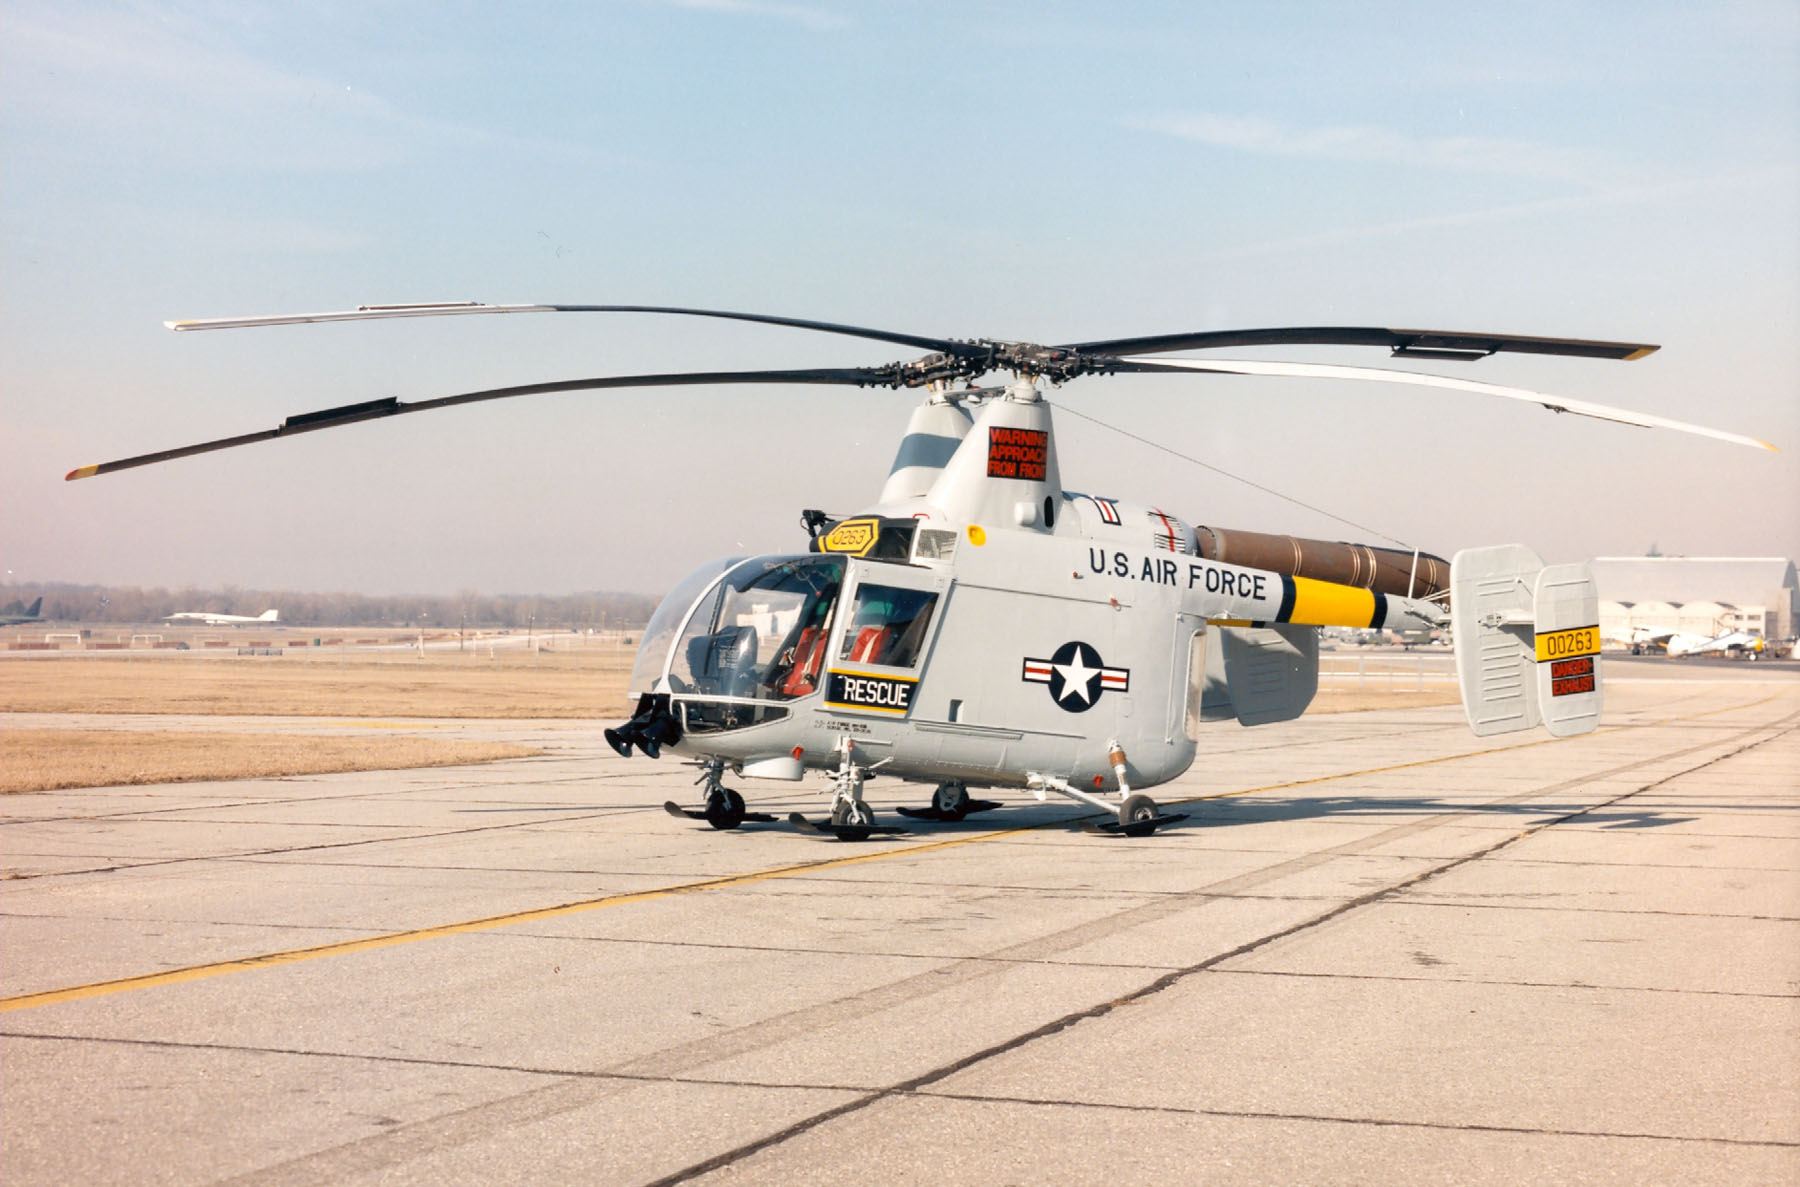 Kaman HH-43B-KA Huskie 60-0263 at the National Museum of the United States Air Force. (U.S. Air Force)